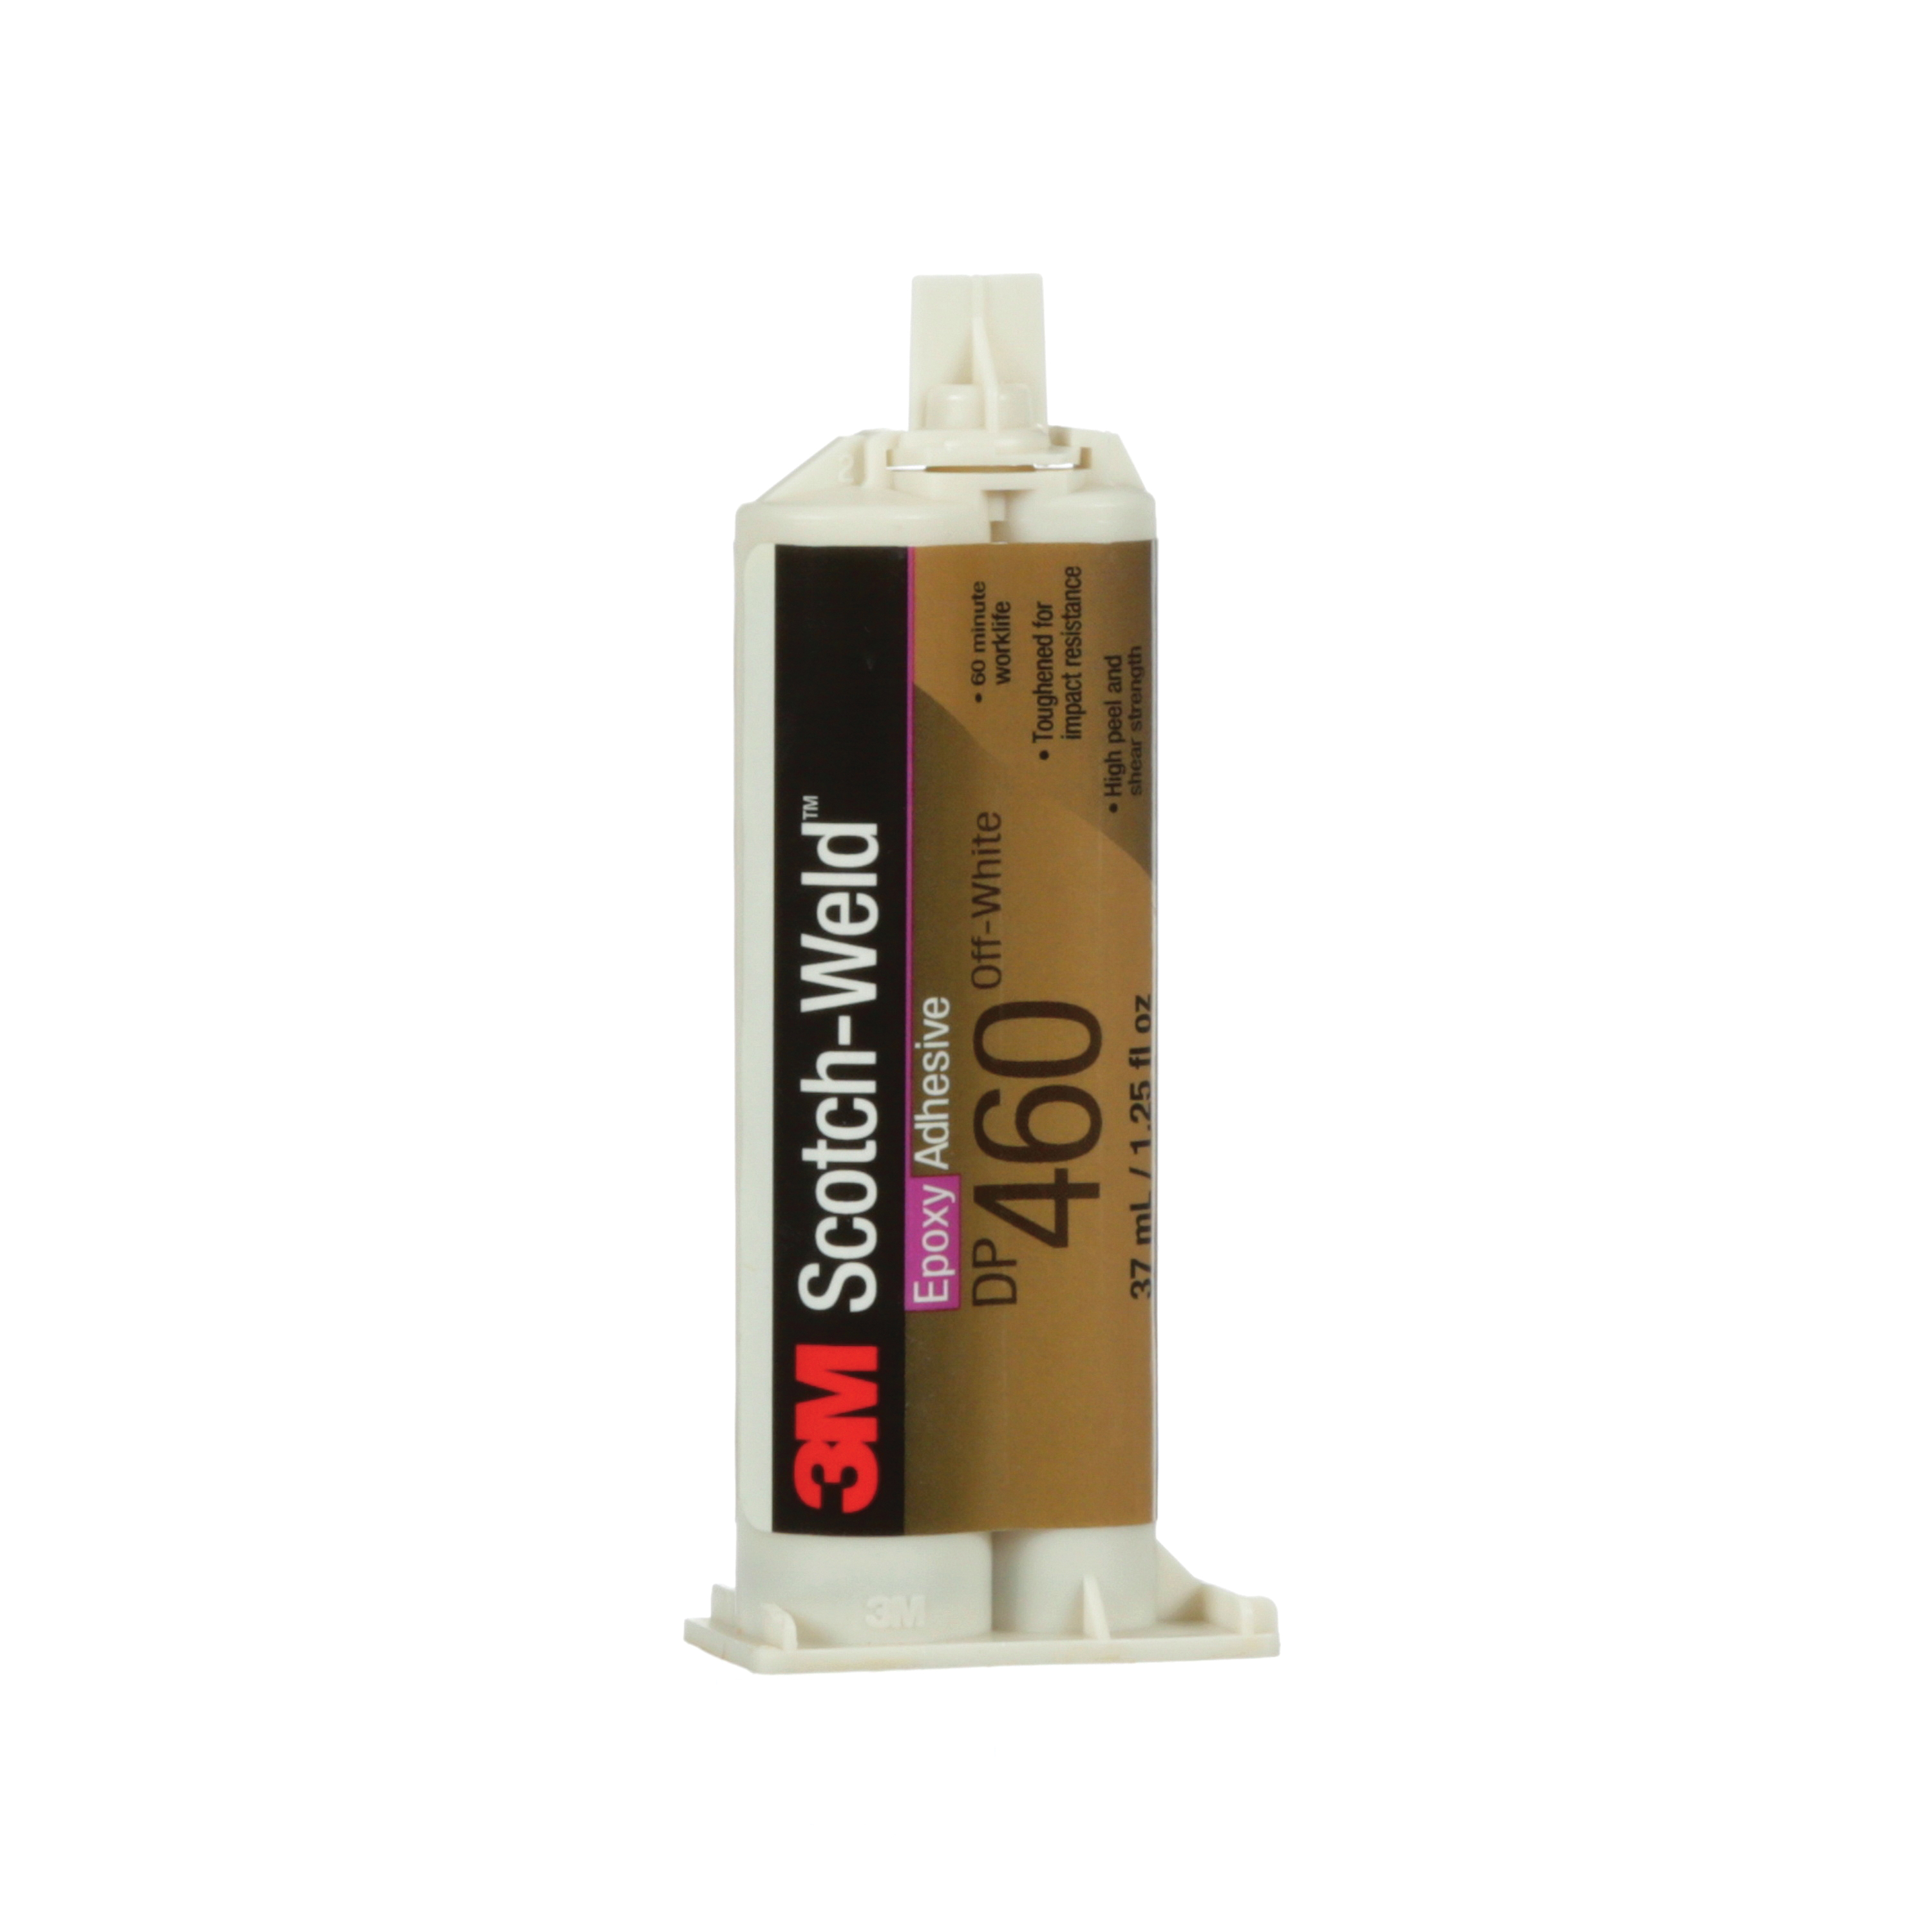 Scotch-Weld™ DP-100 2-Part Part Epoxy Adhesive, 1.69 oz Duo-Pak Cartridge, Clear, 24 to 48 hr at 72 deg F Curing